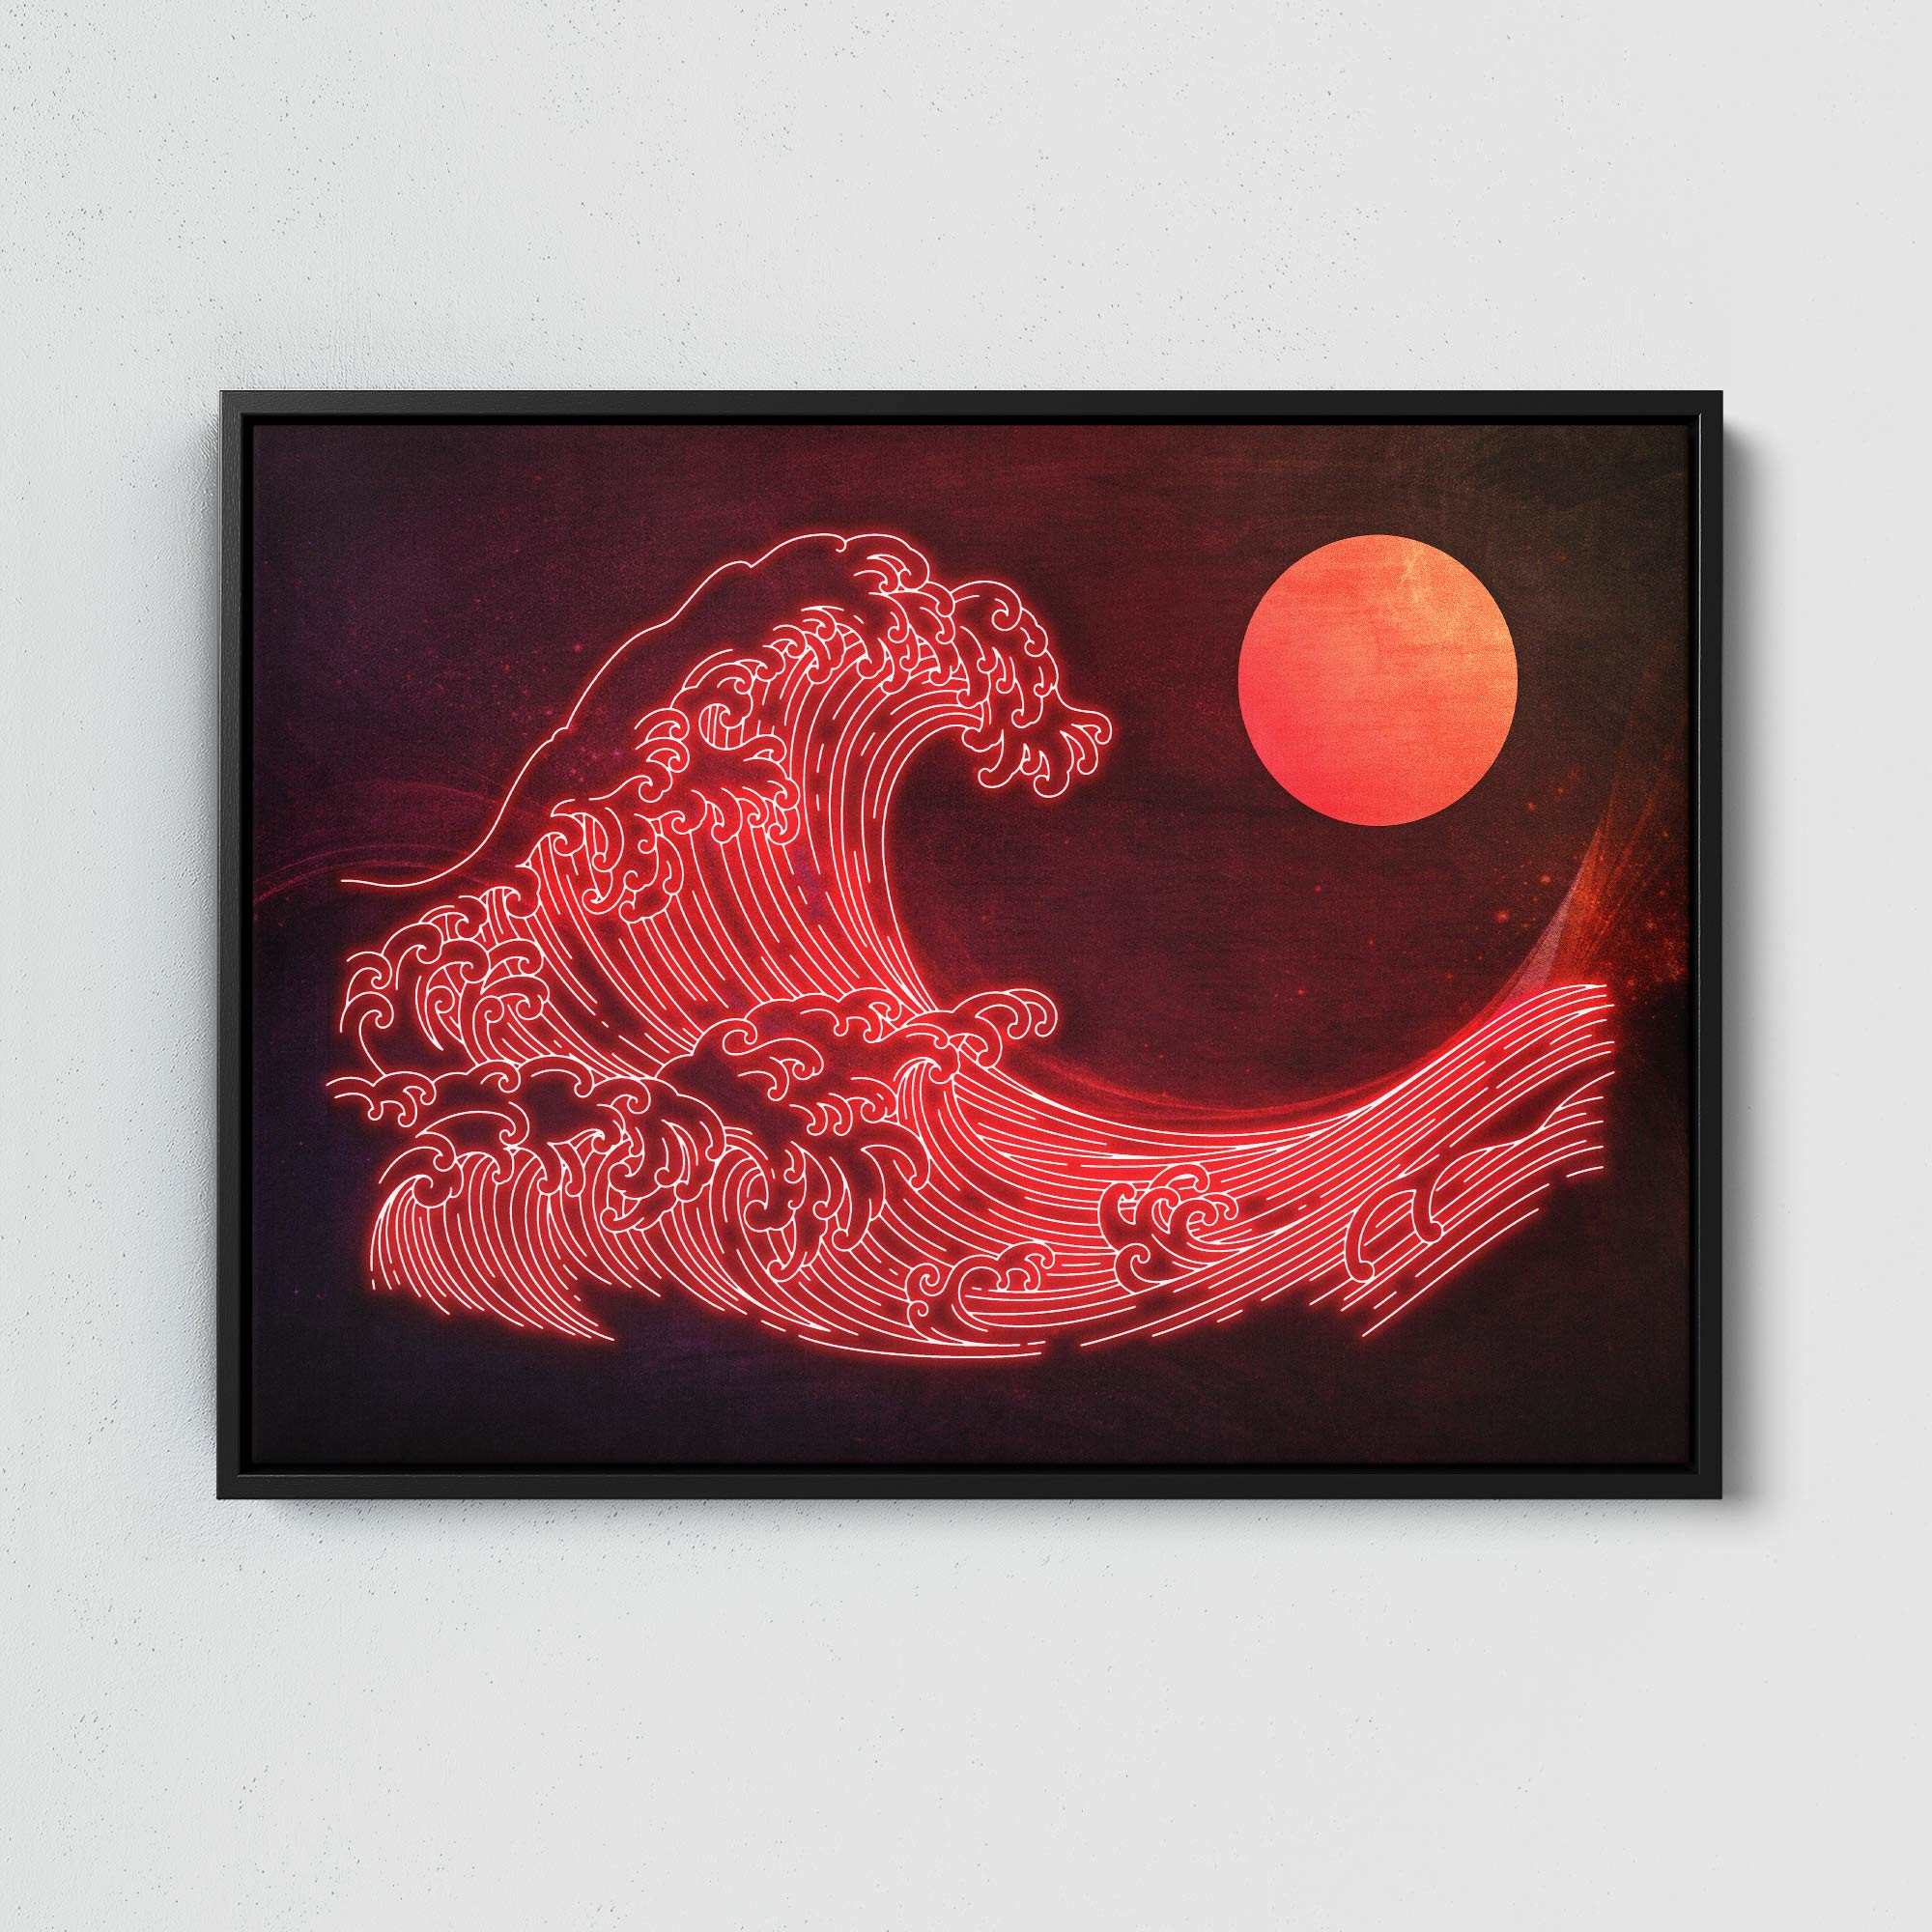 Japanese sun and wave art print for sale